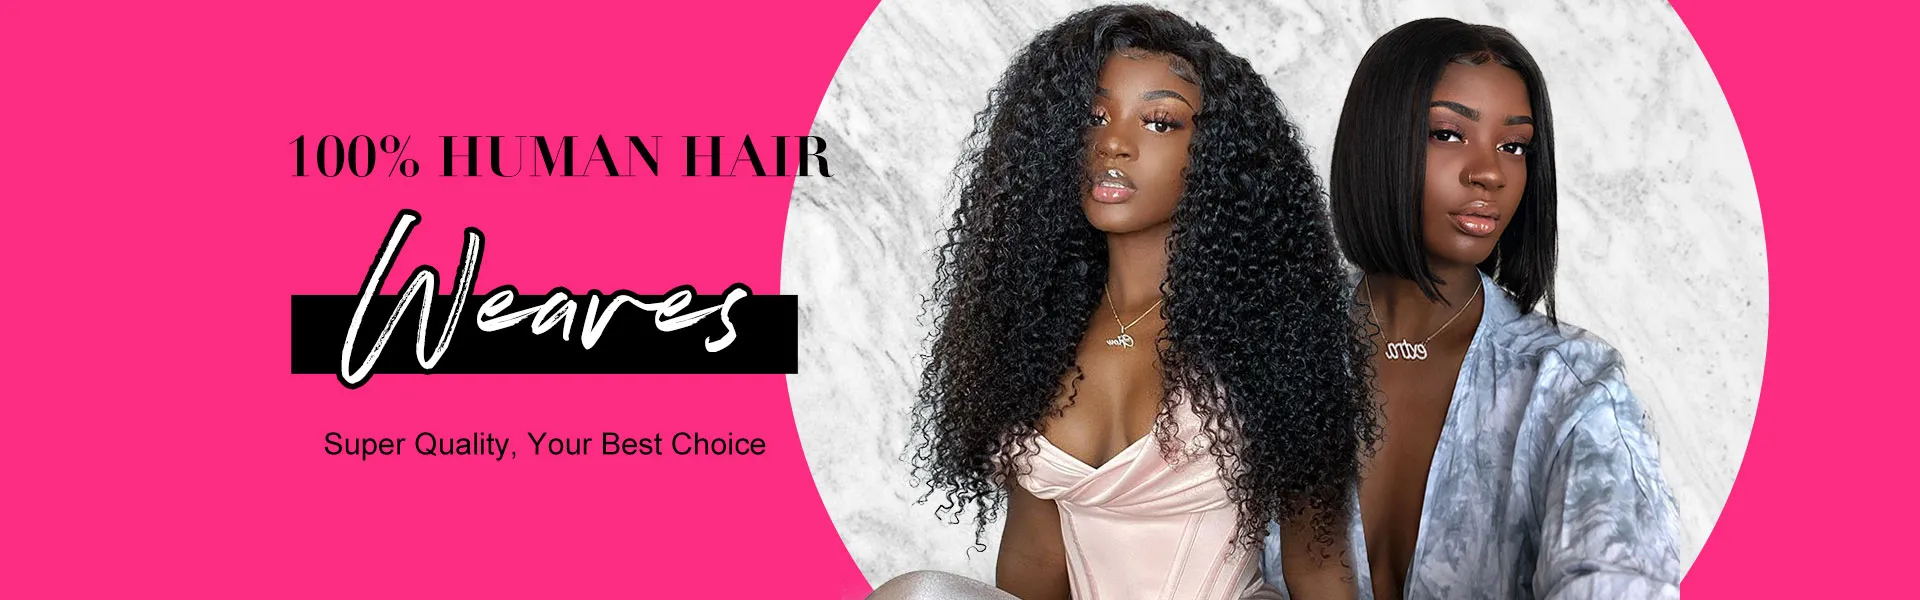 Things You Need to Consider Before Buying a Wig